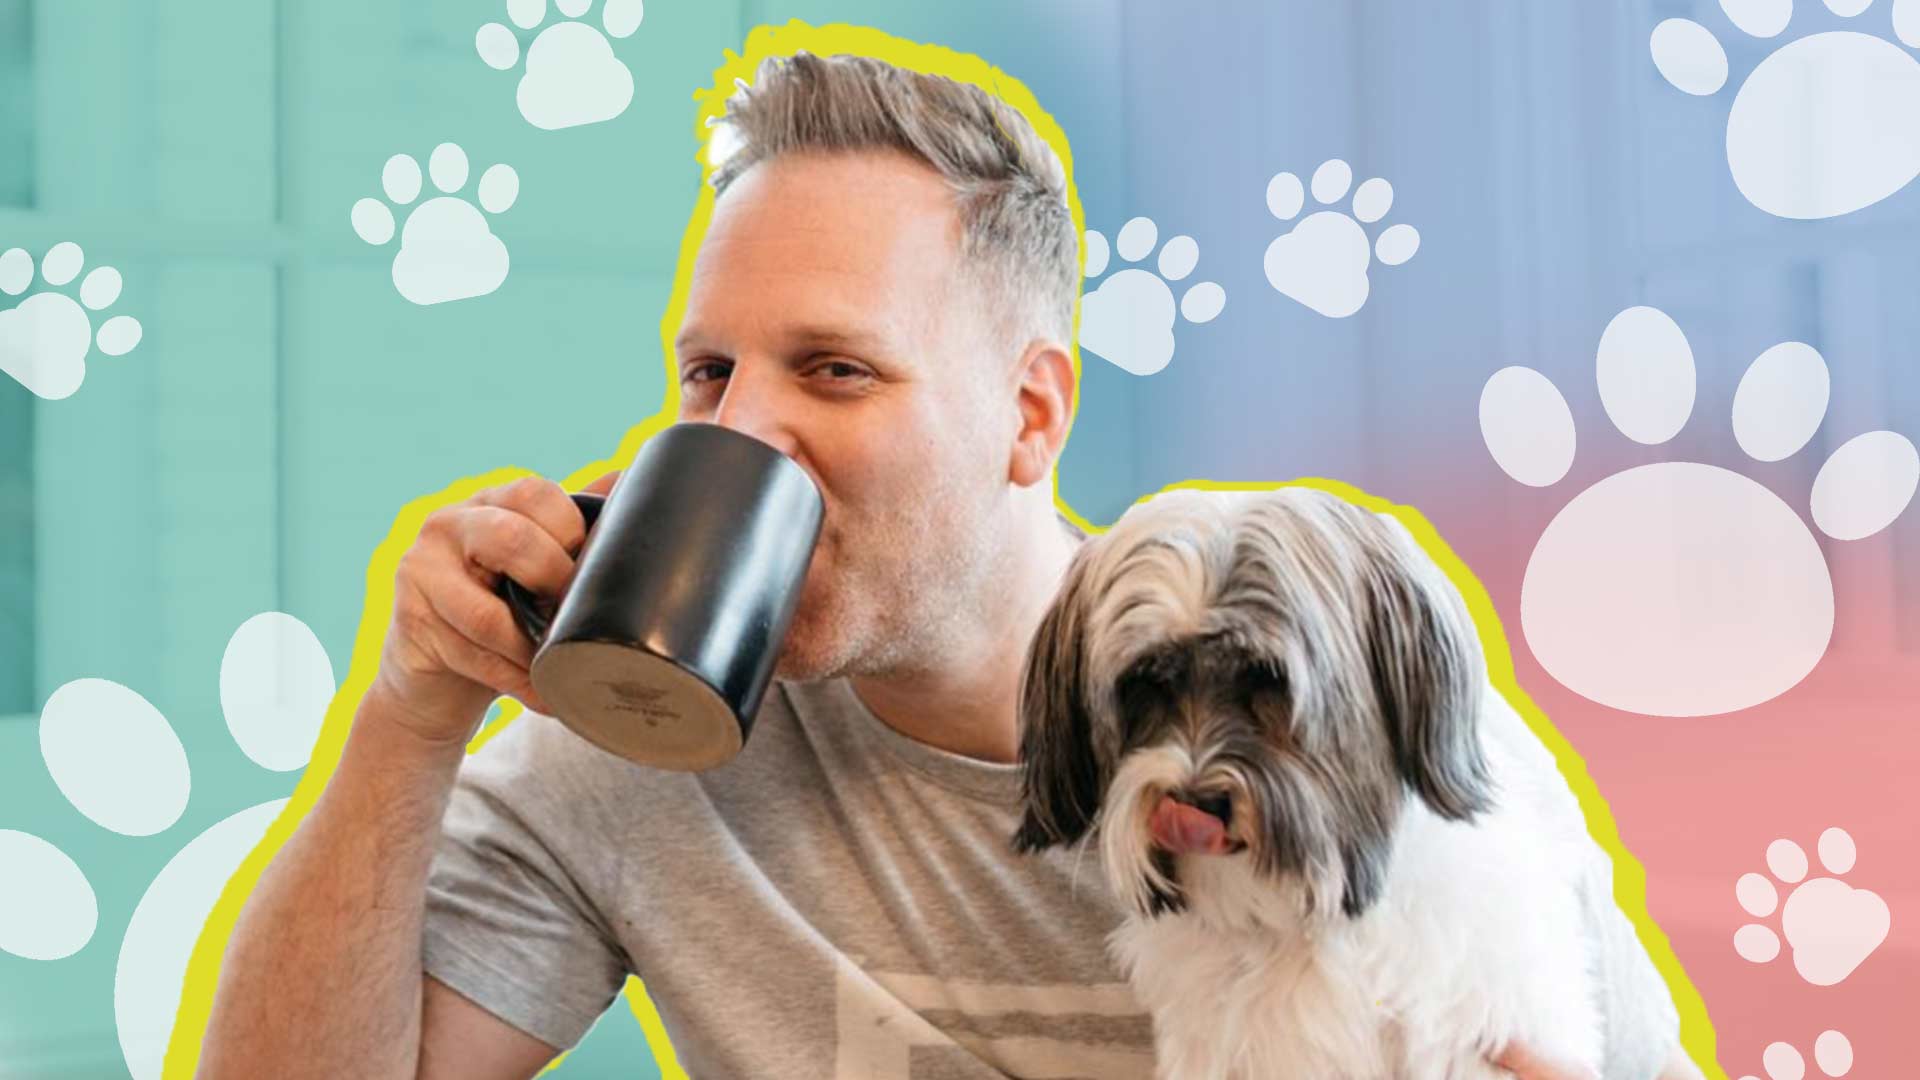 Matthew West Drinking Coffee With His Dog and Other Christian Artist Who Love Dogs